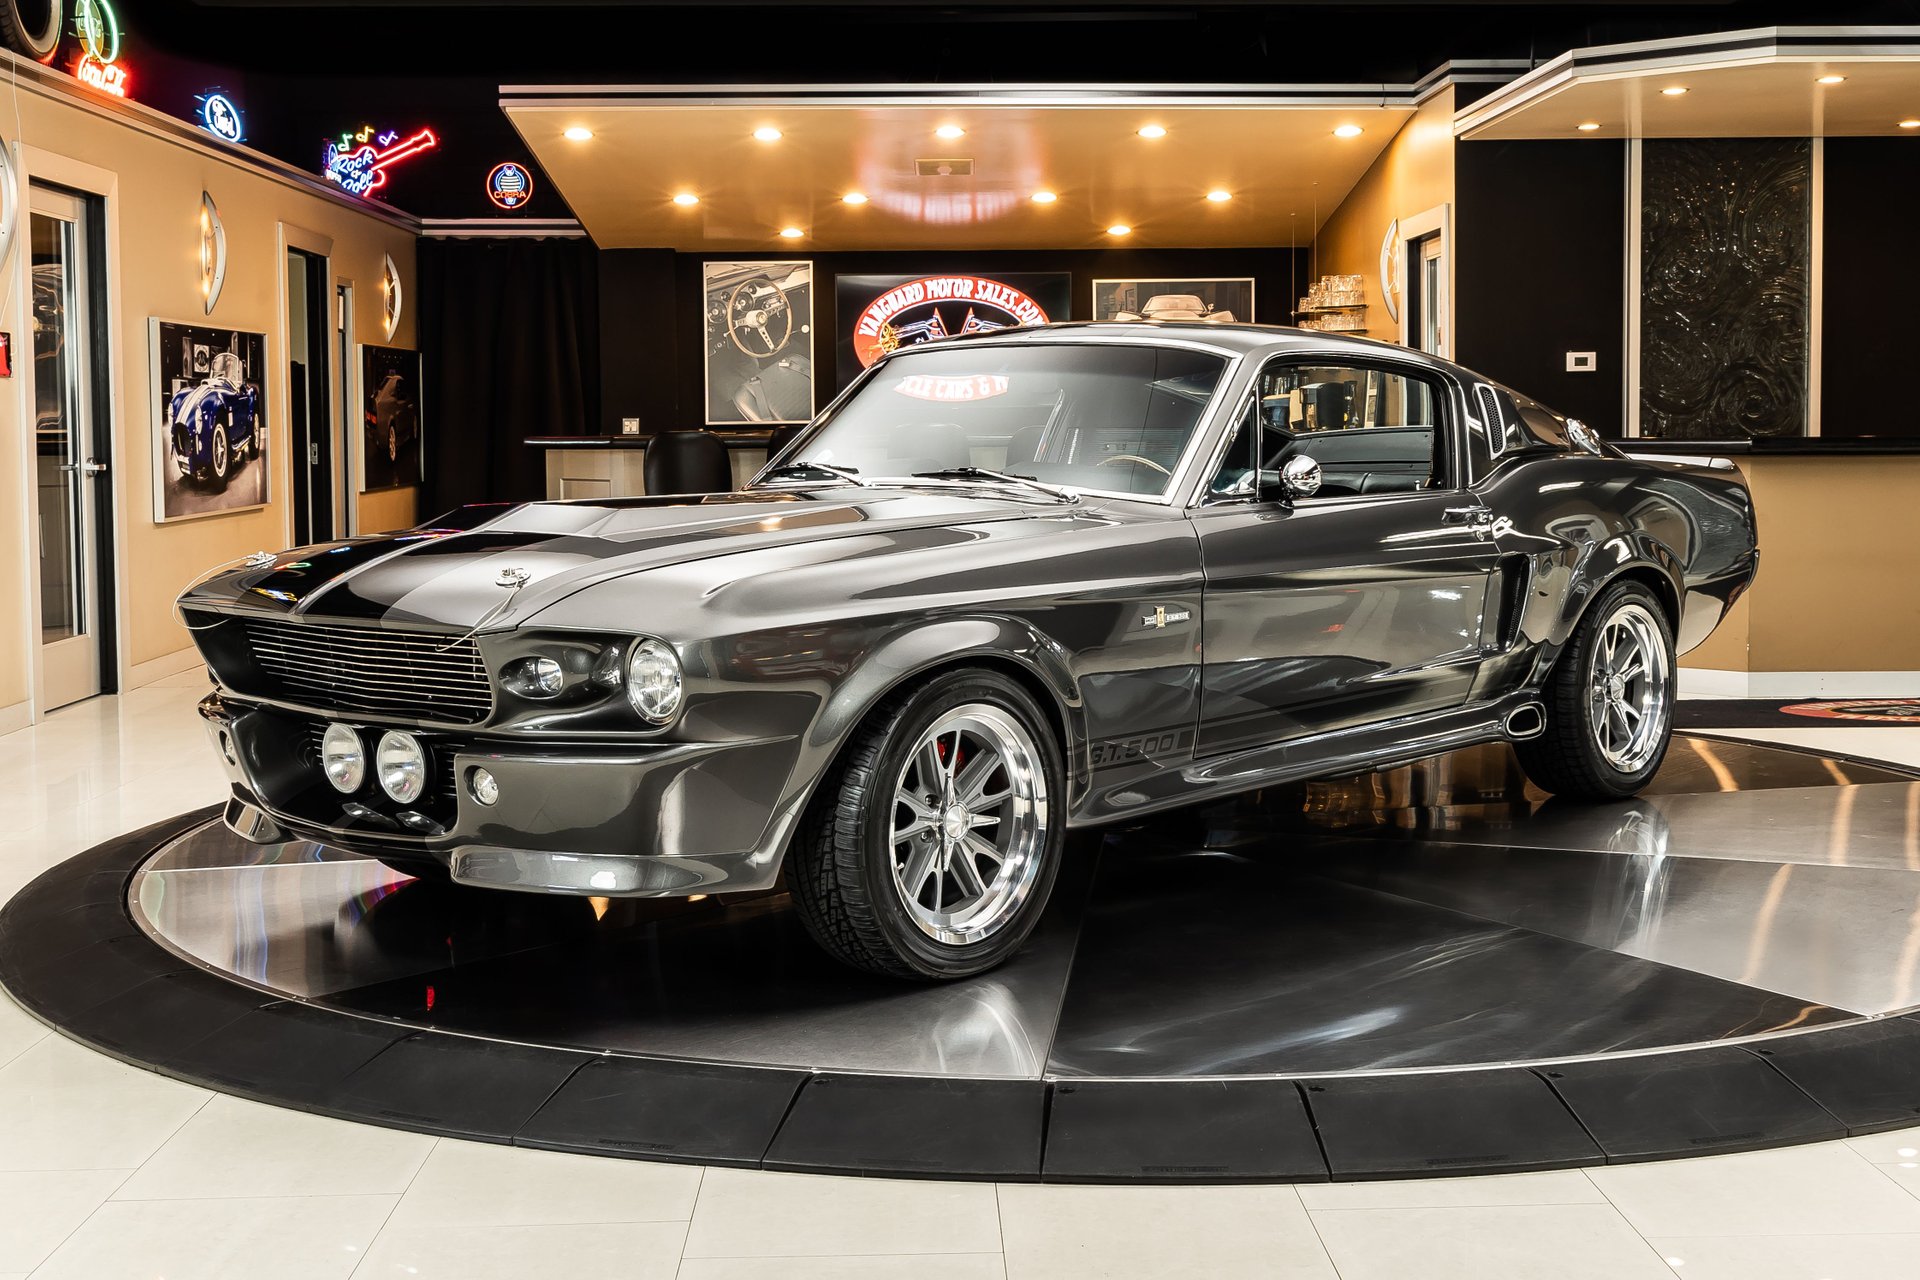 1968 Ford Mustang | Classic Cars for Sale Michigan: Muscle & Old Cars | Vanguard  Motor Sales